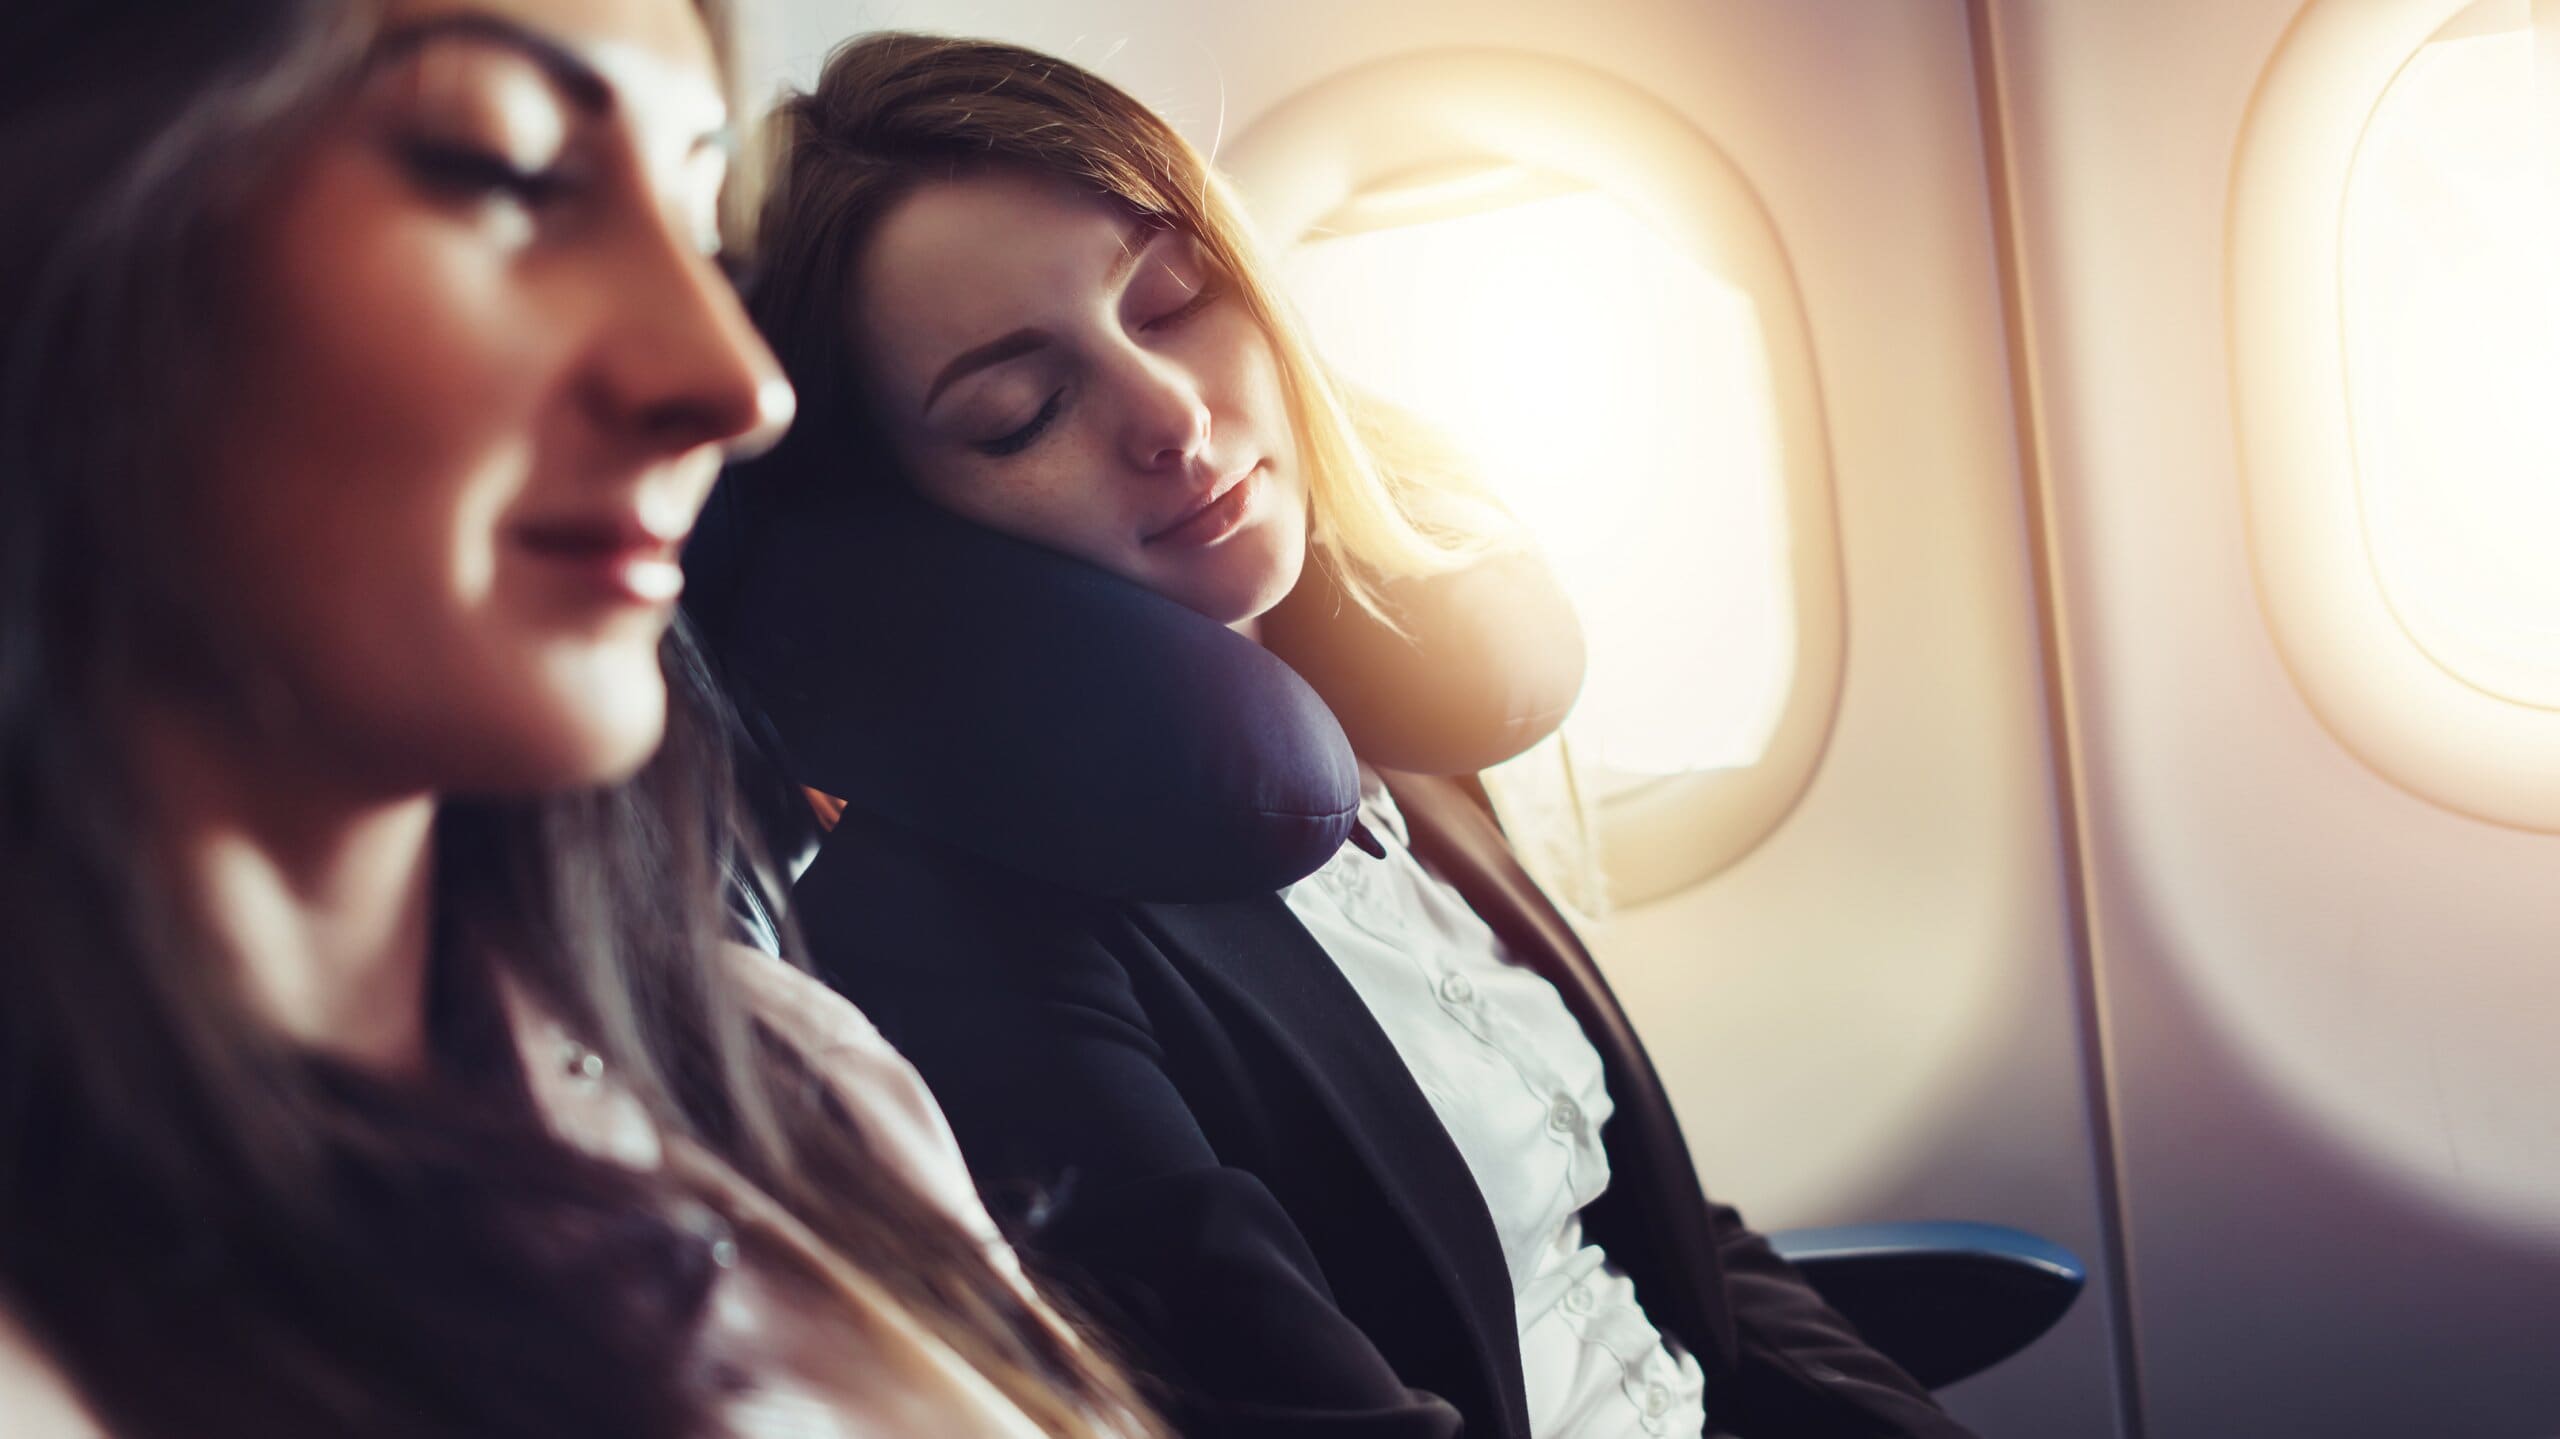 Two women on a plane, one sleeping with a memory foam travel pillow around her neck.